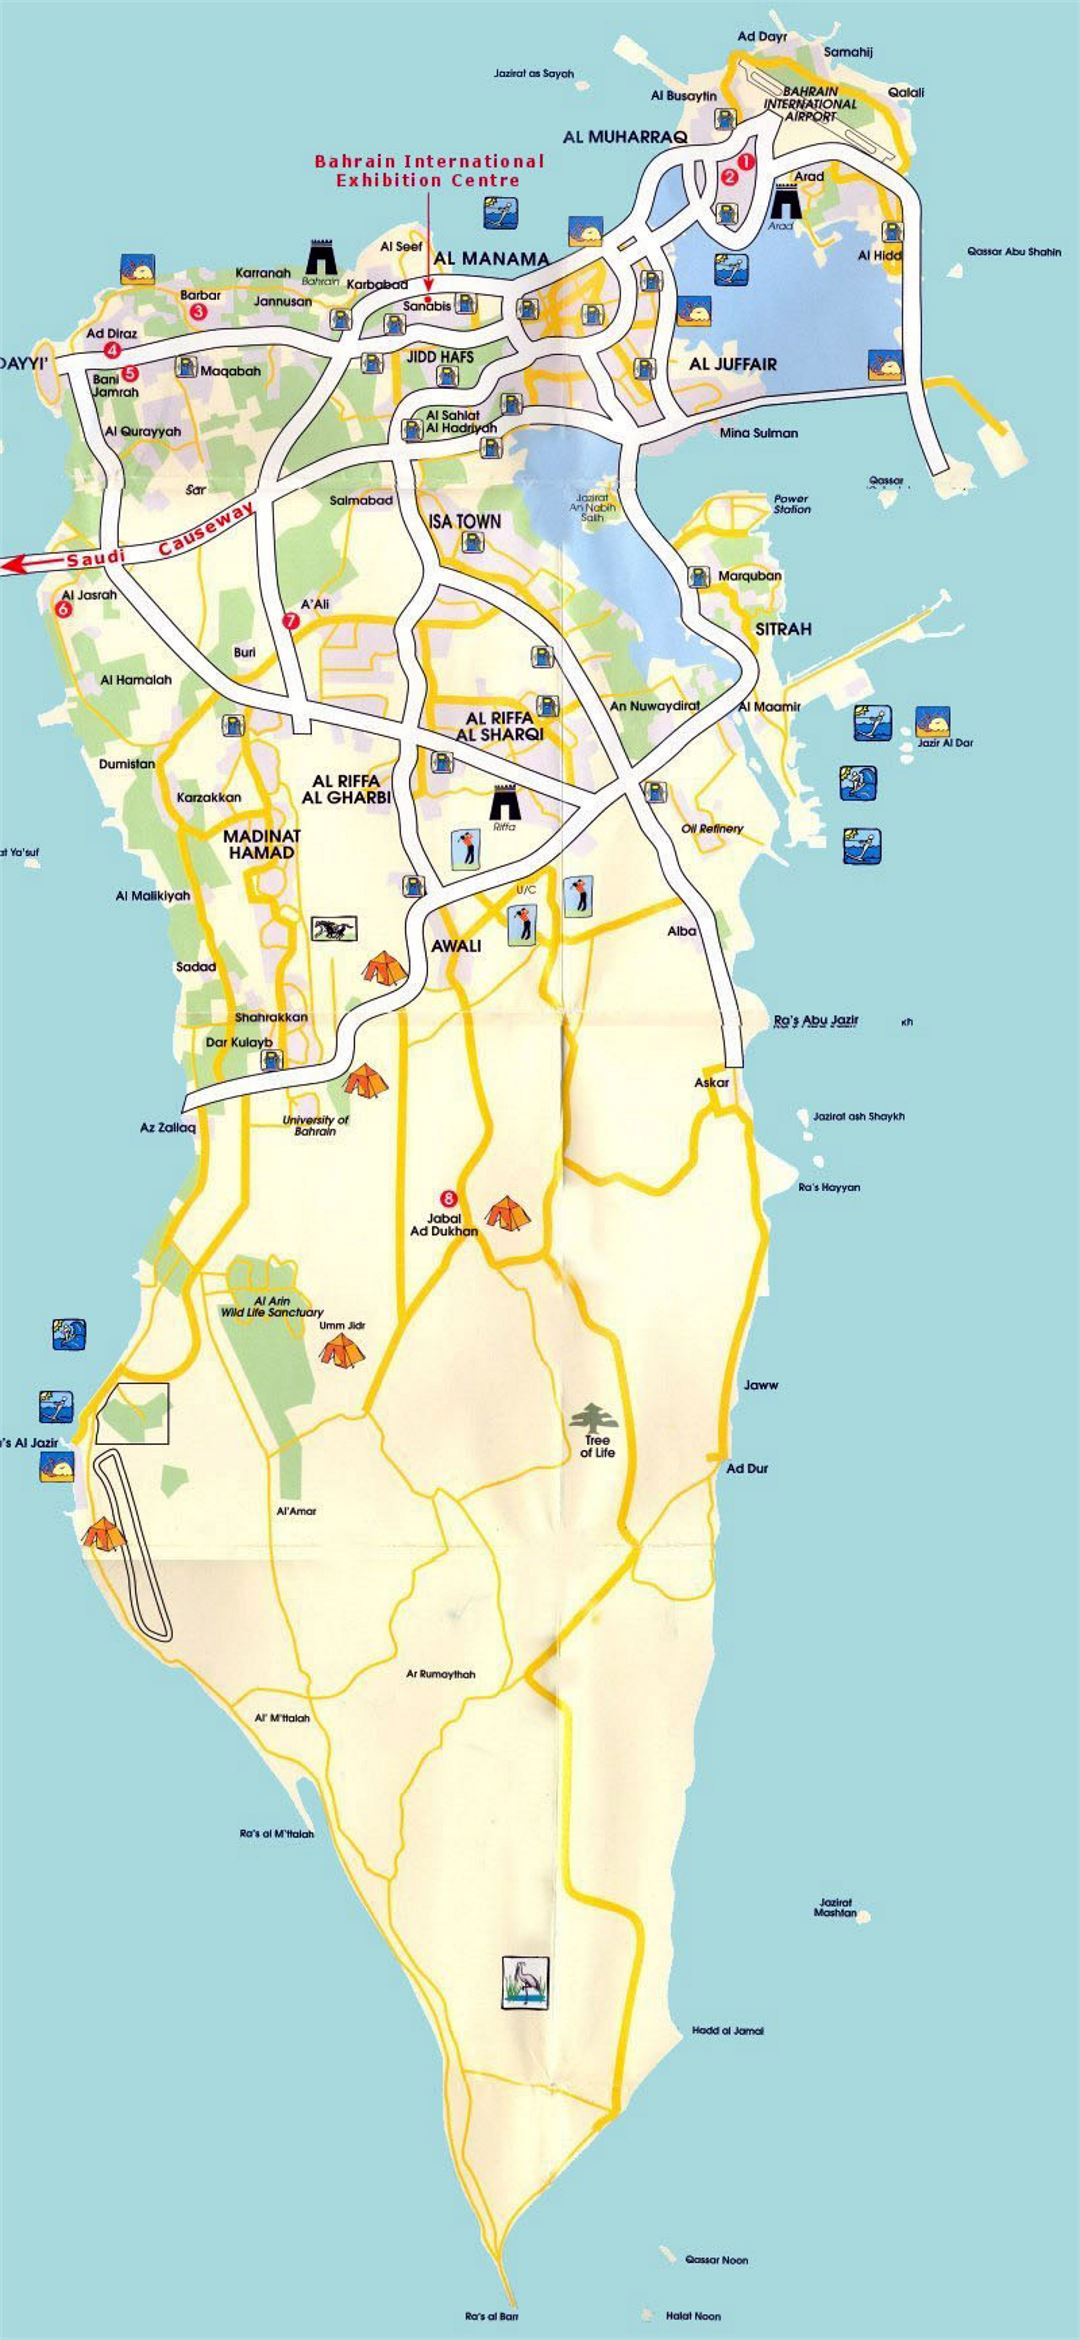 Detailed tourist map of Bahrain with roads